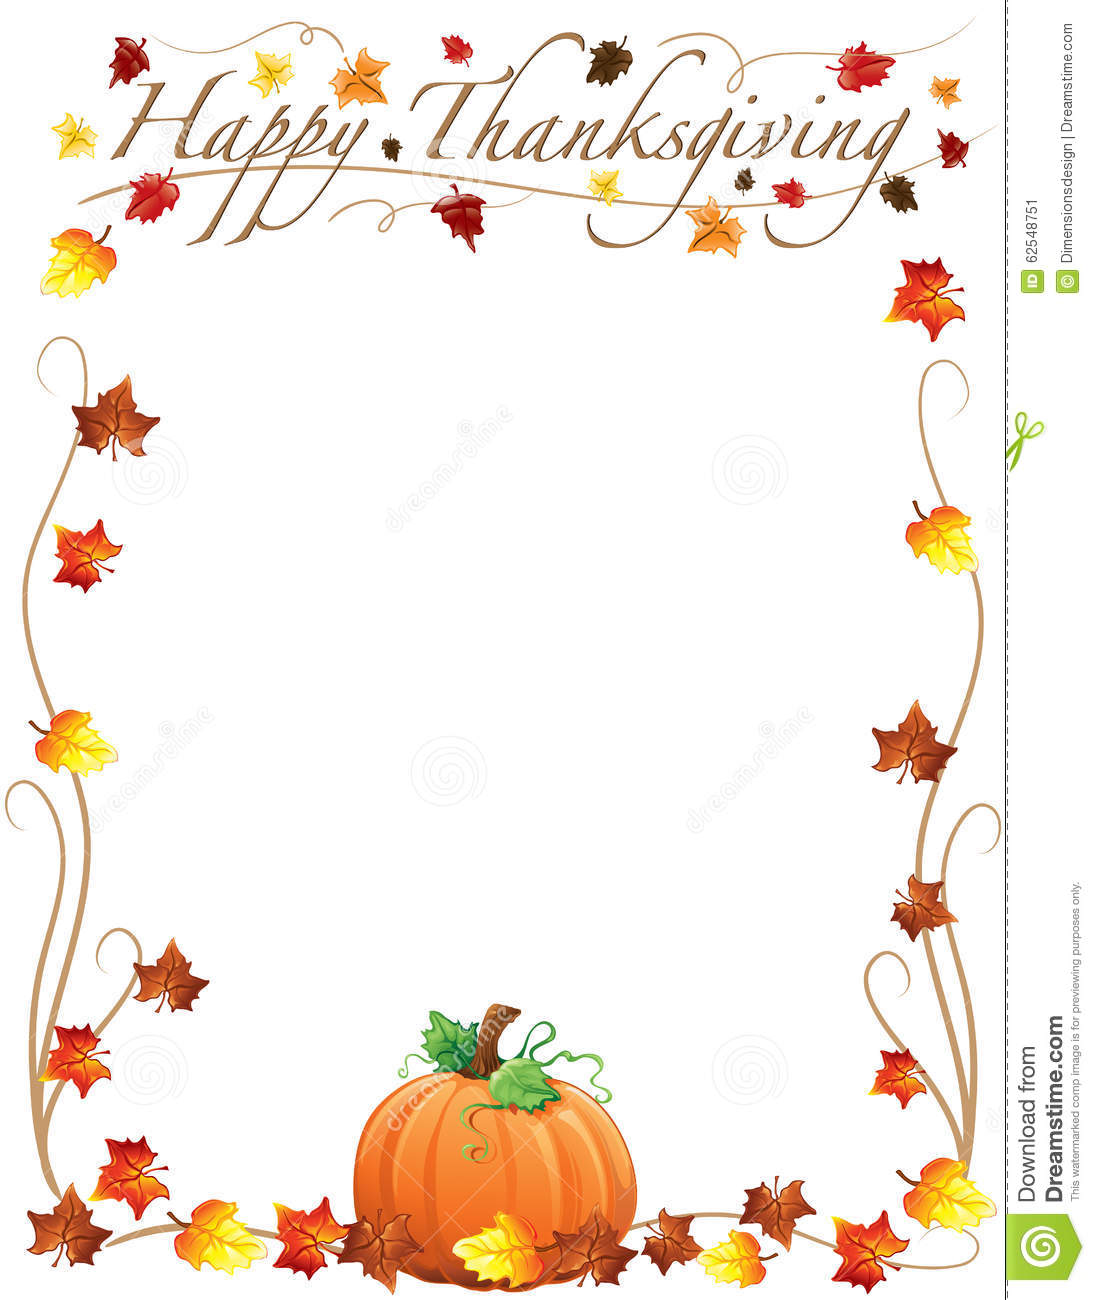 Happy Thanksgiving border with .